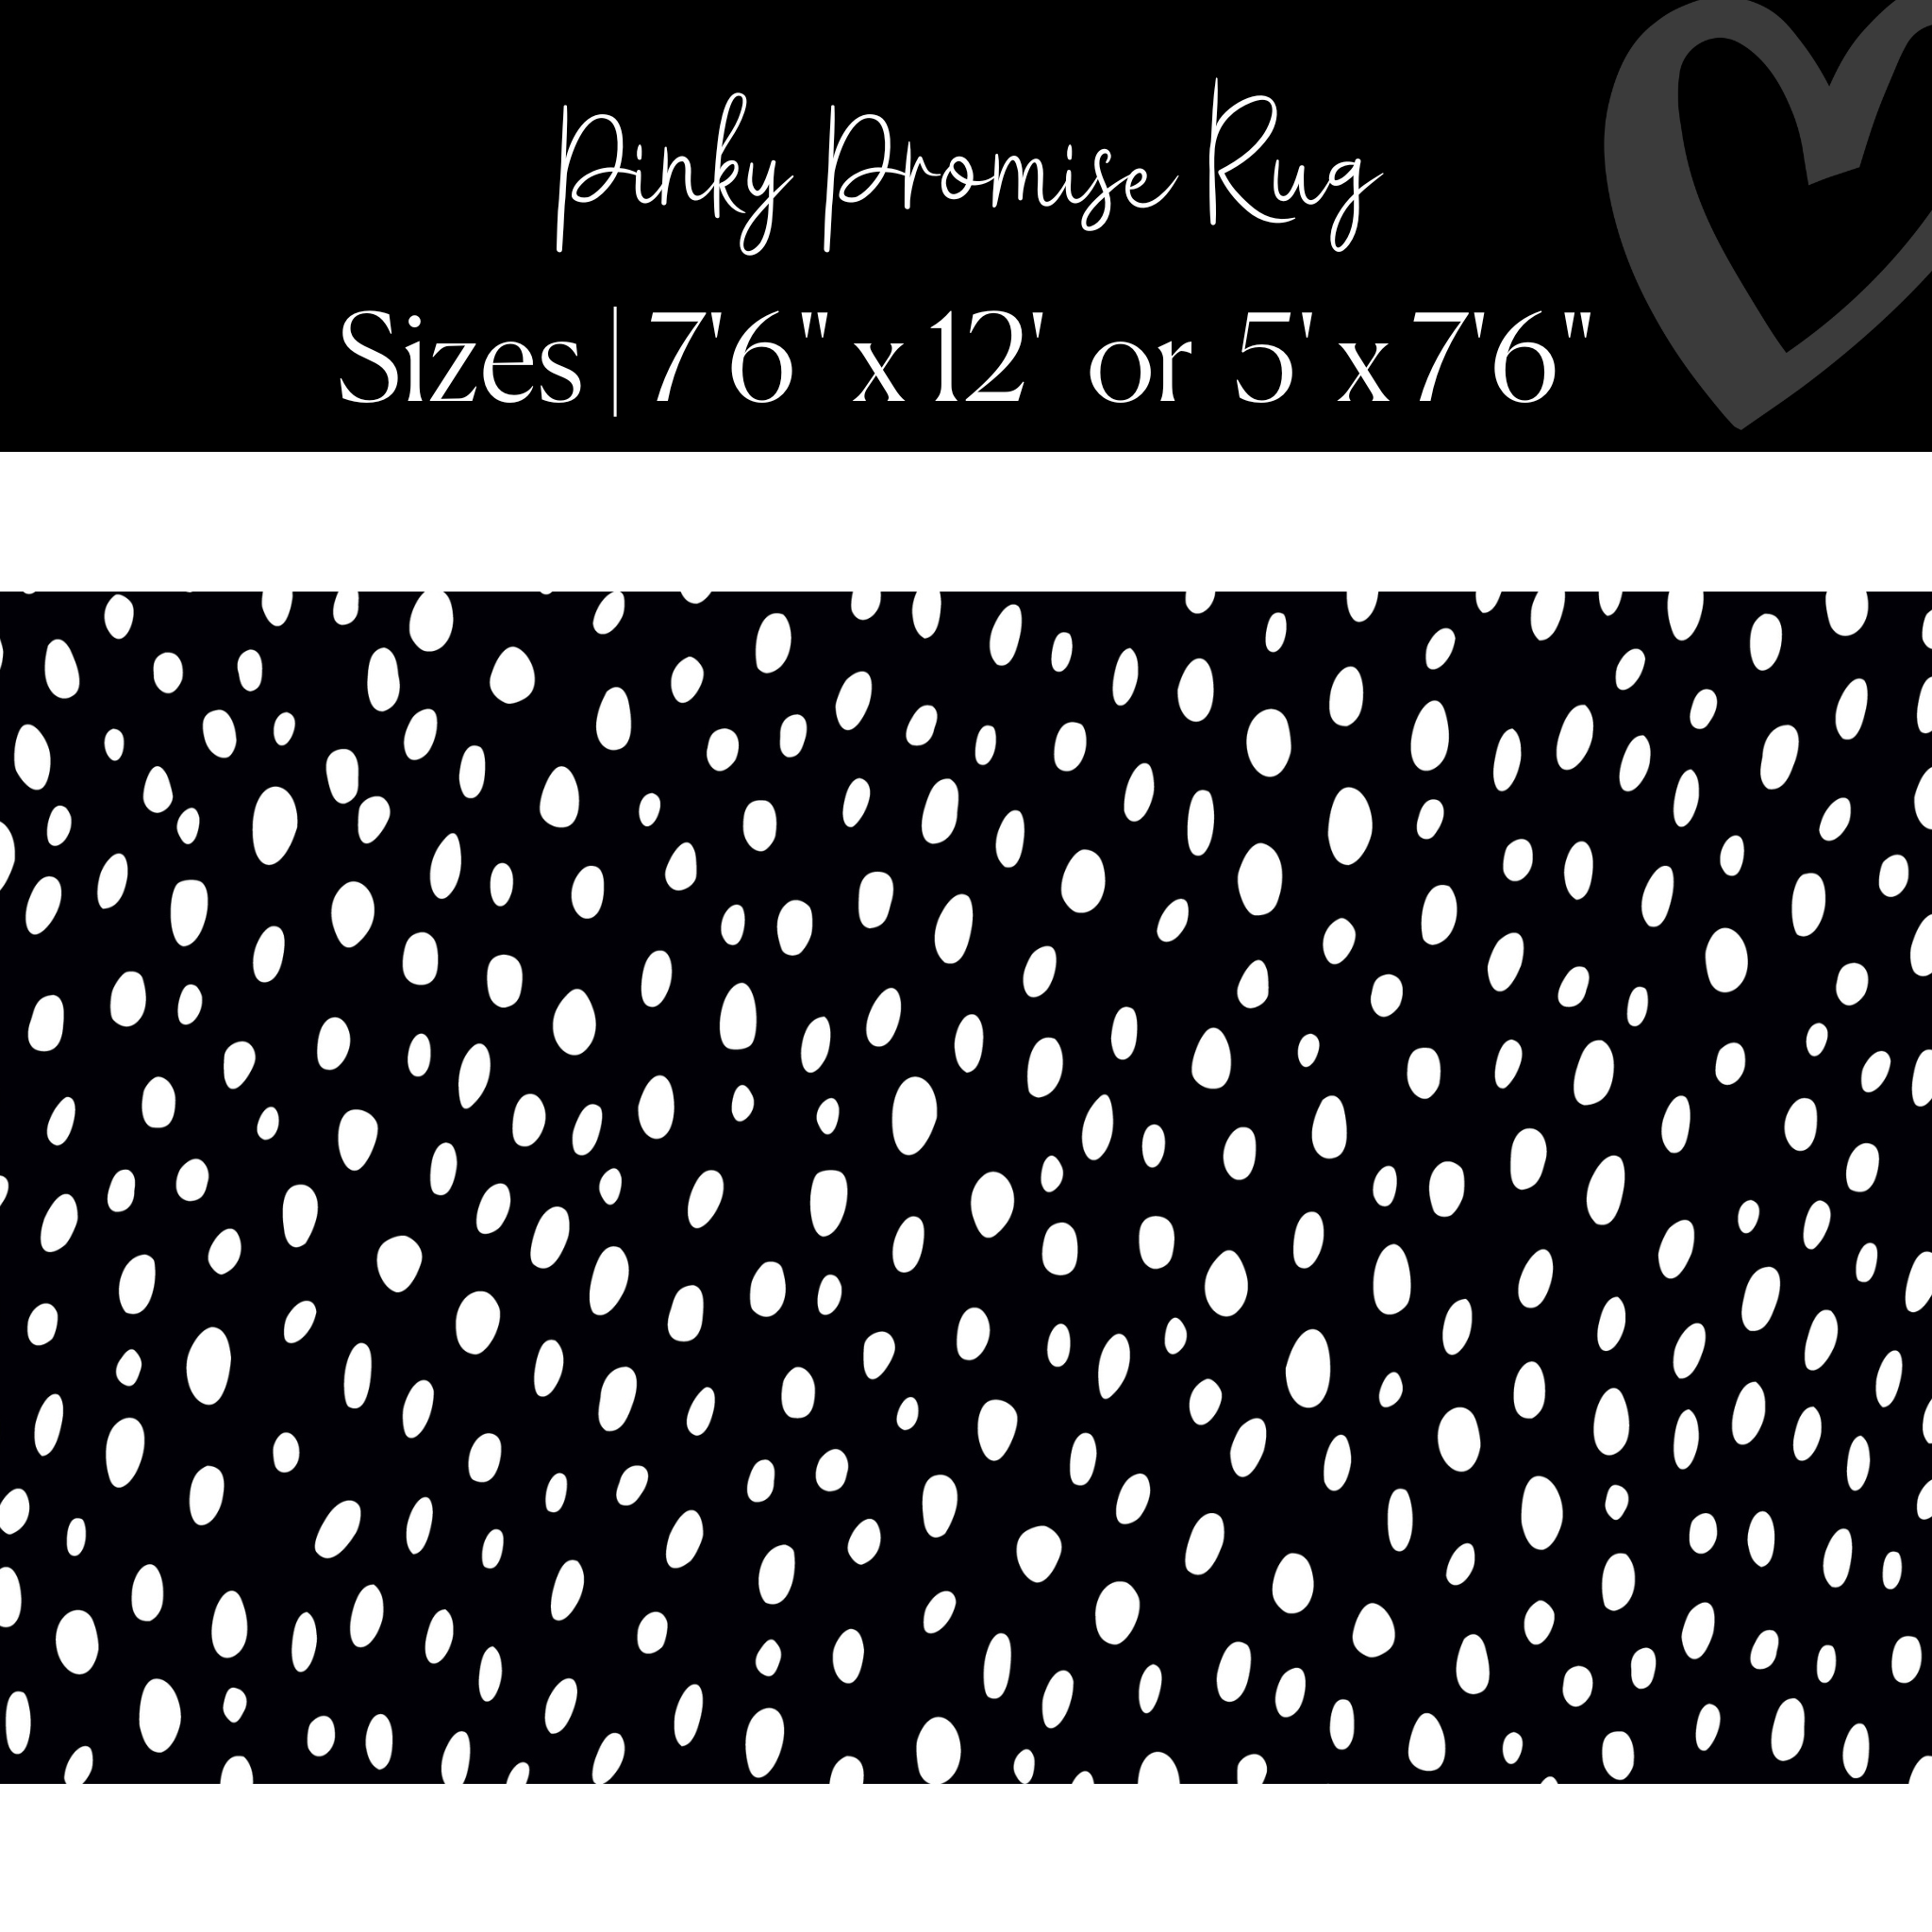 Black and White Spotty Rug | Black and White Classroom Rug | Pinky Promise | Schoolgirl Style